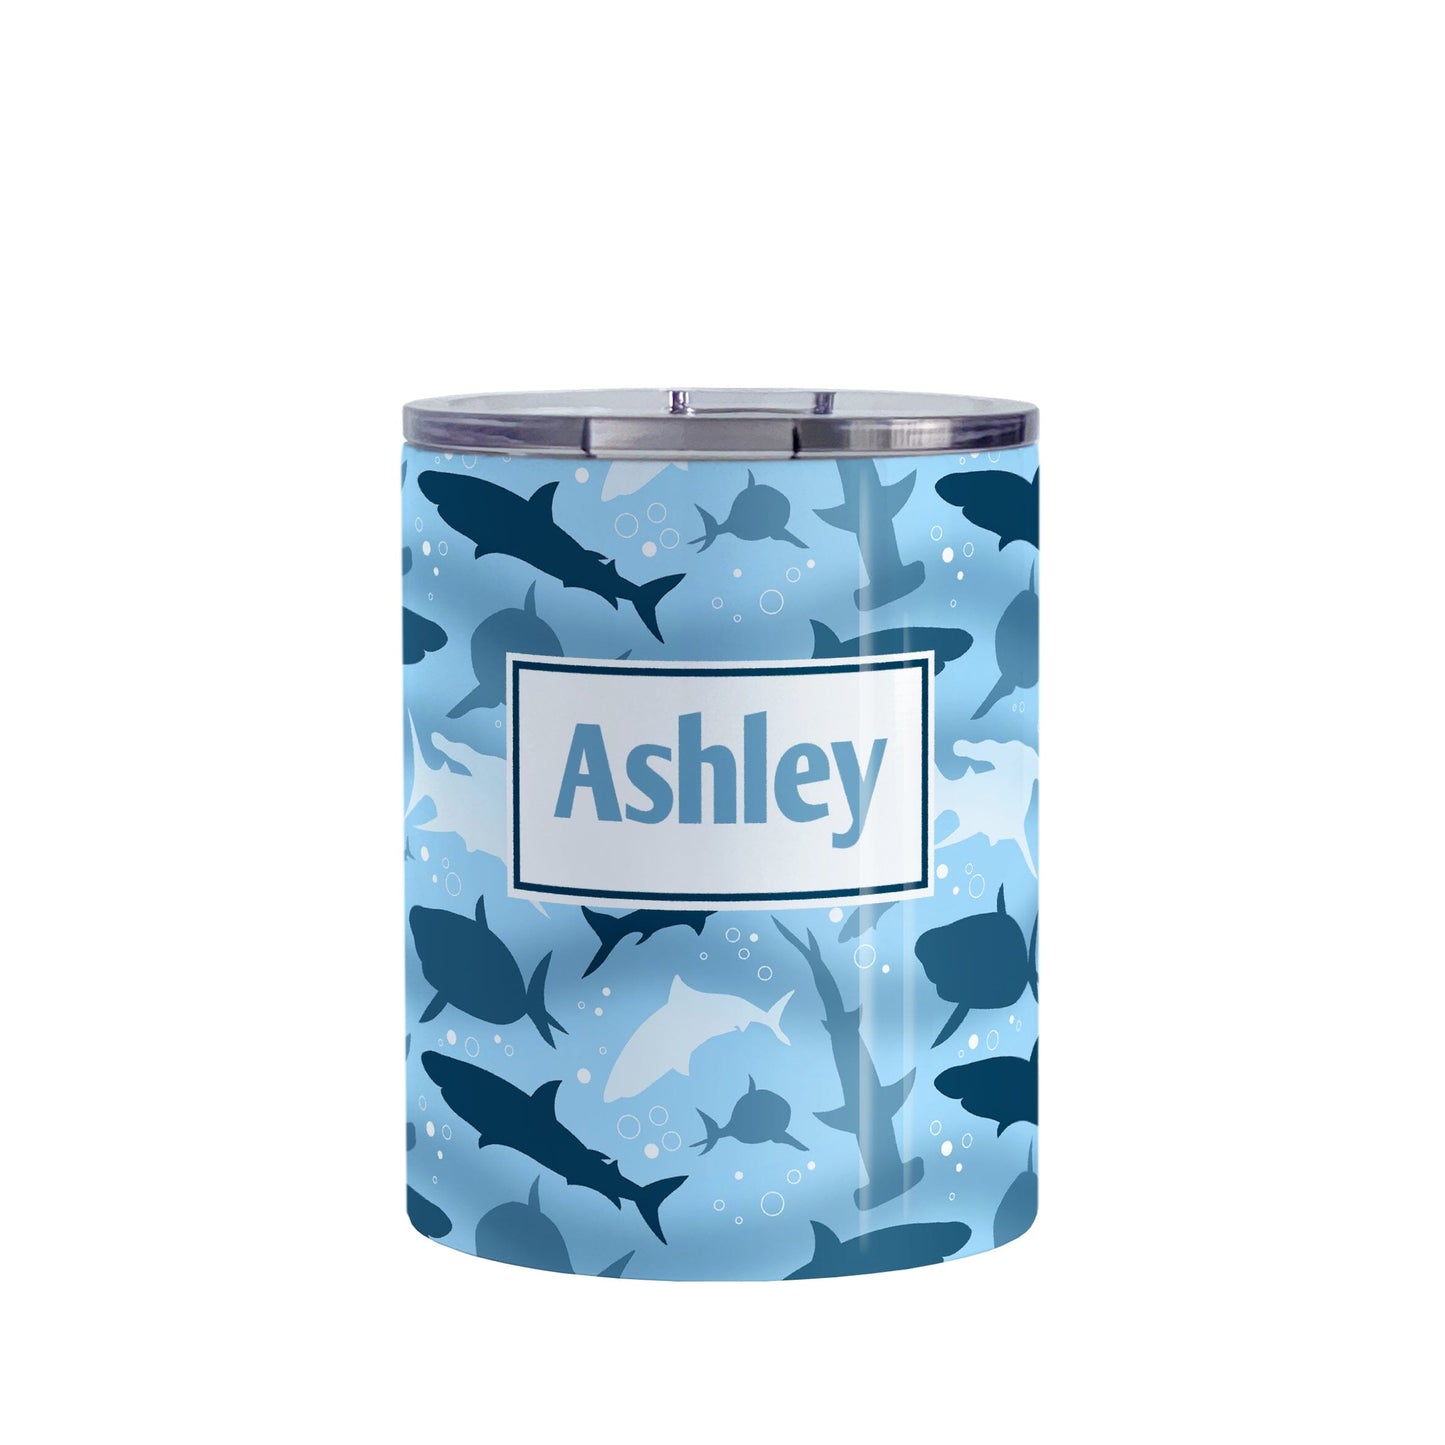 Personalized Blue Frenzy Sharks Tumbler Cup (10oz) at Amy's Coffee Mugs. A stainless steel insulated tumbler cup designed with a pattern of sharks in different shades of blue, in a frenzy deep beneath the water, that wraps around the cup. Your personalized name is custom printed in blue over the shark pattern.